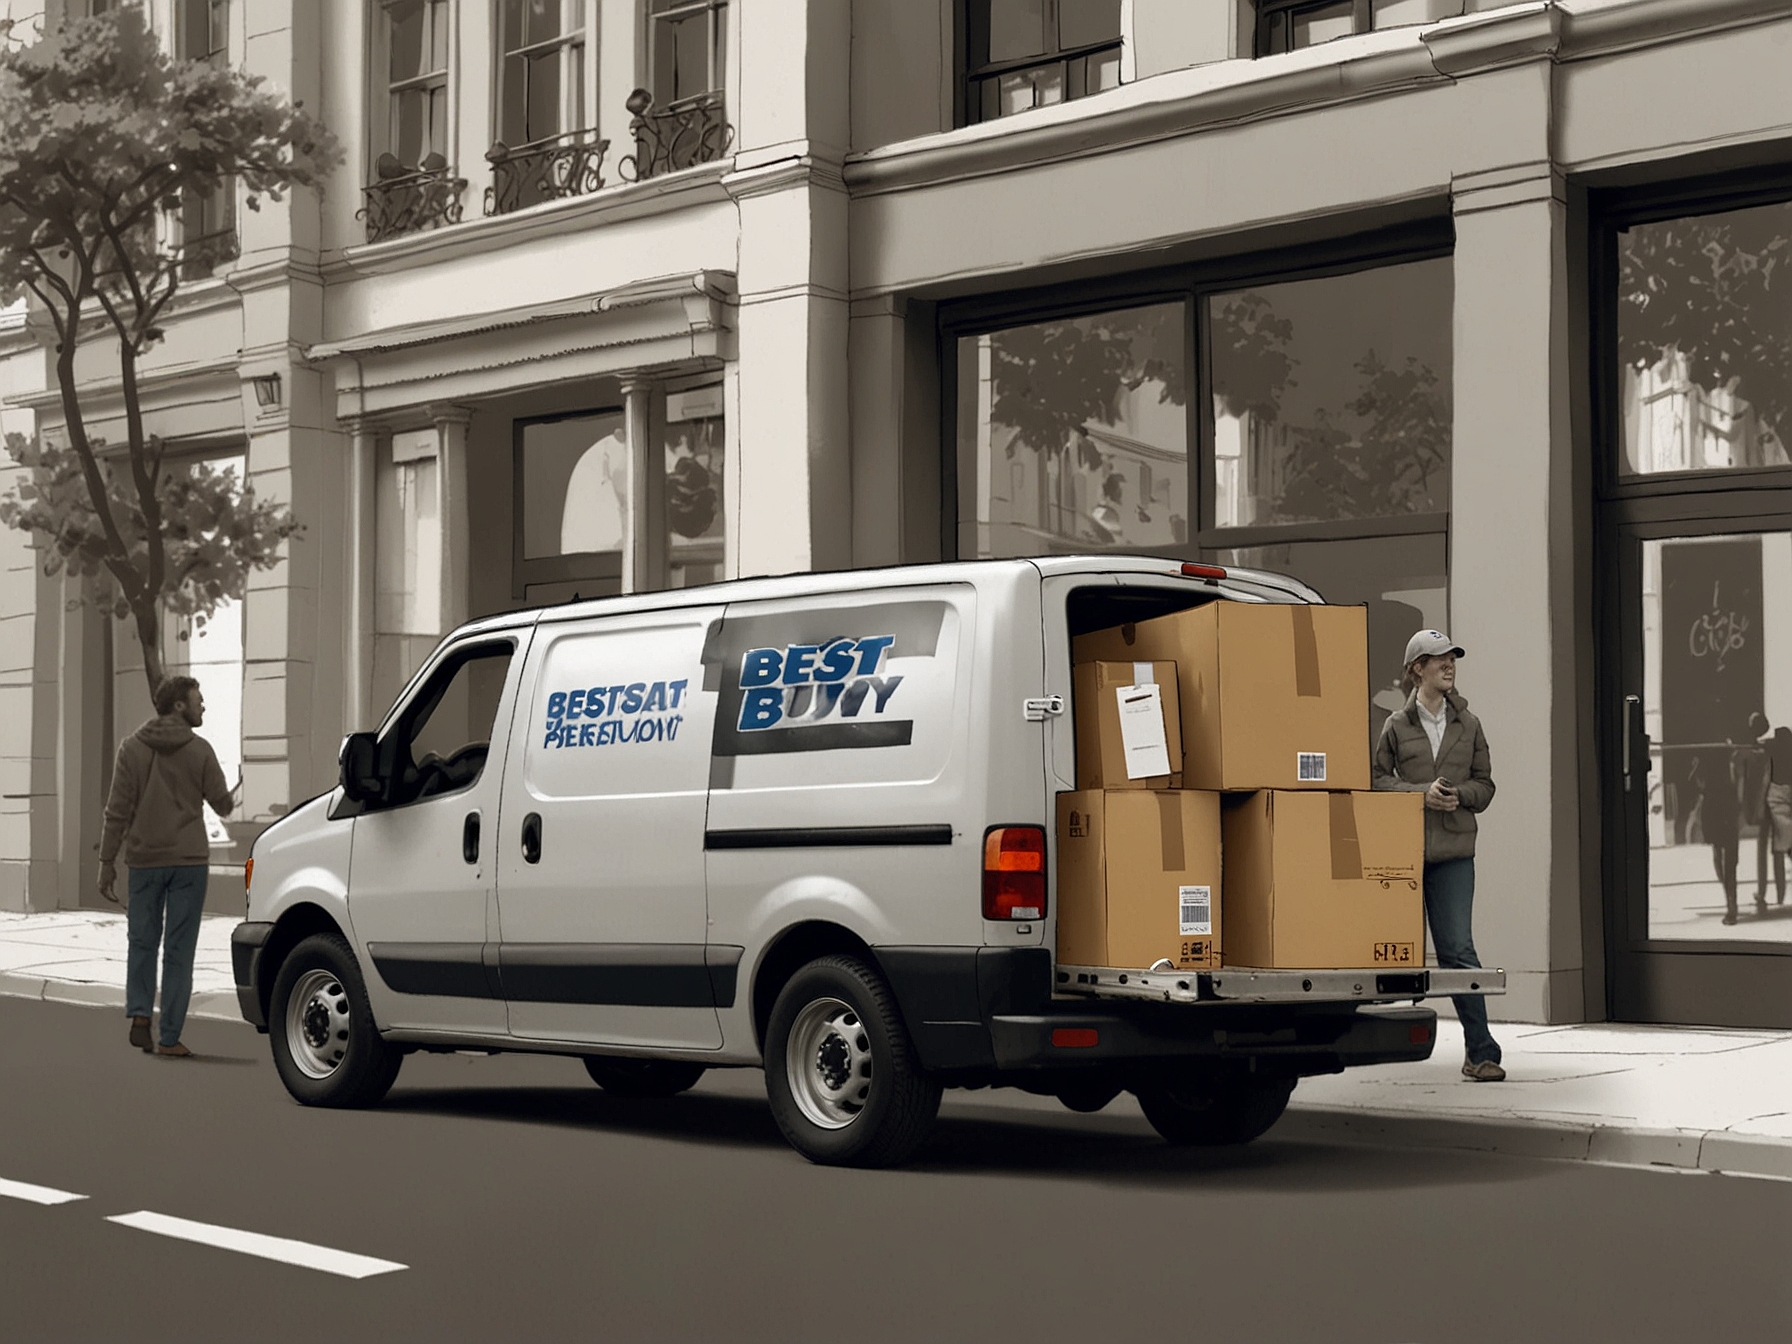 An image illustrating the fast and efficient delivery service of Best Buy's sale event, with a delivery van and a happy customer receiving a package within 2 days.